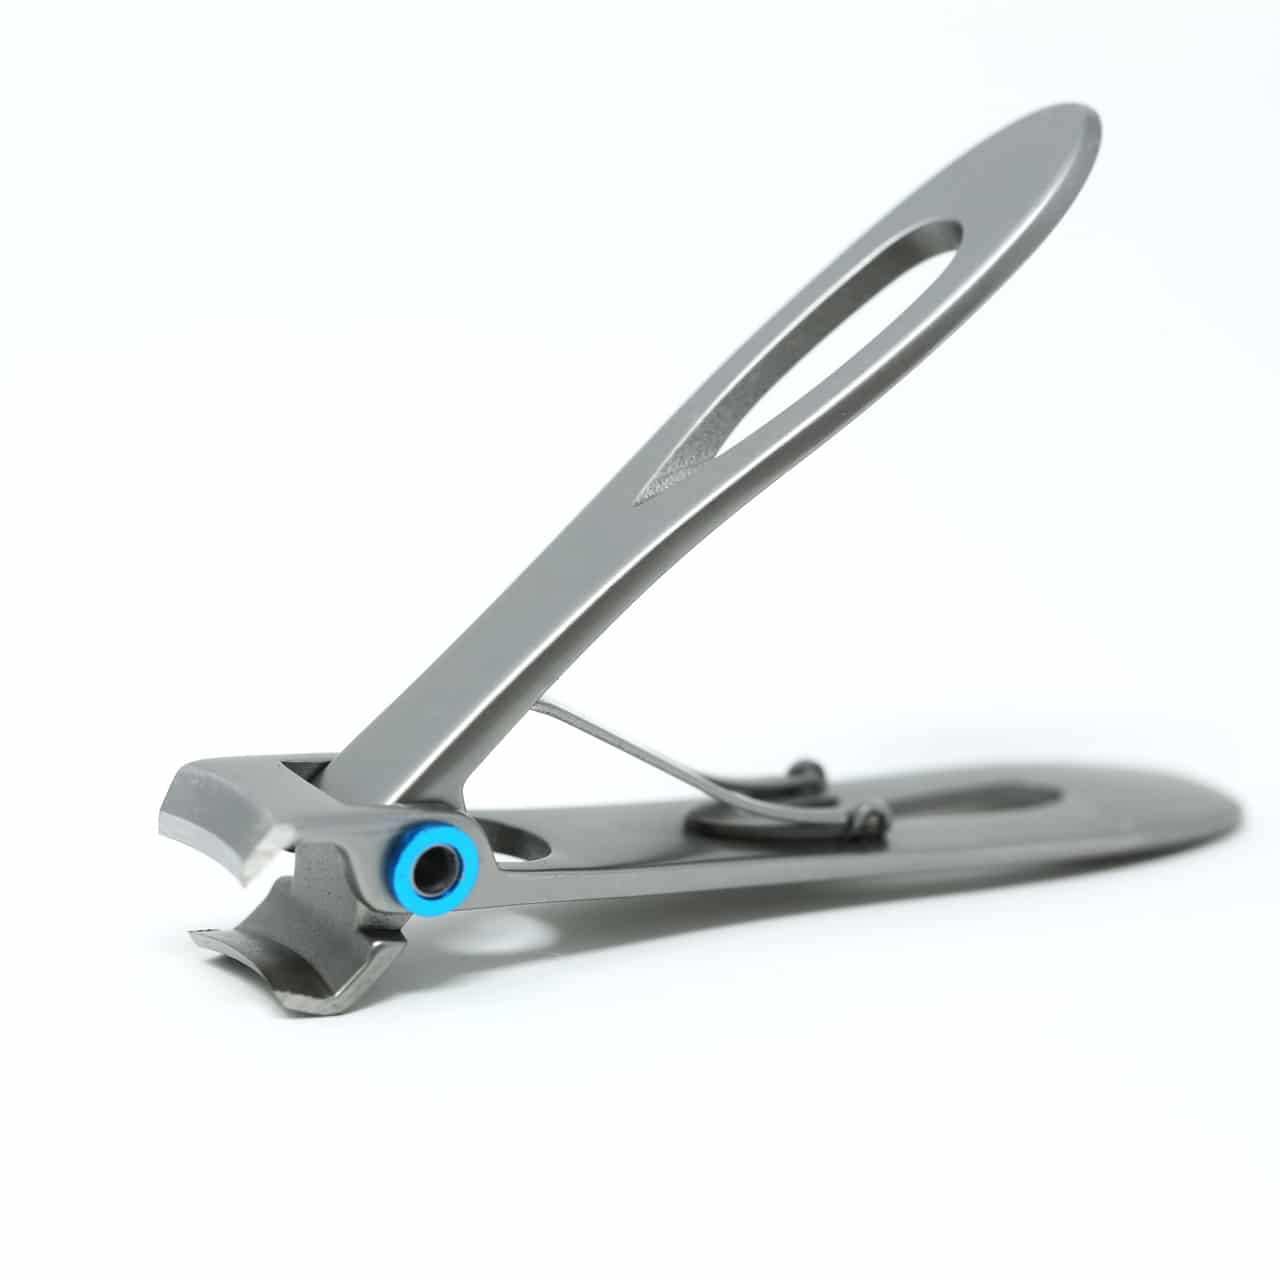  Dotmalls Nail Clipper,Nail Clippers,Ultra Wide